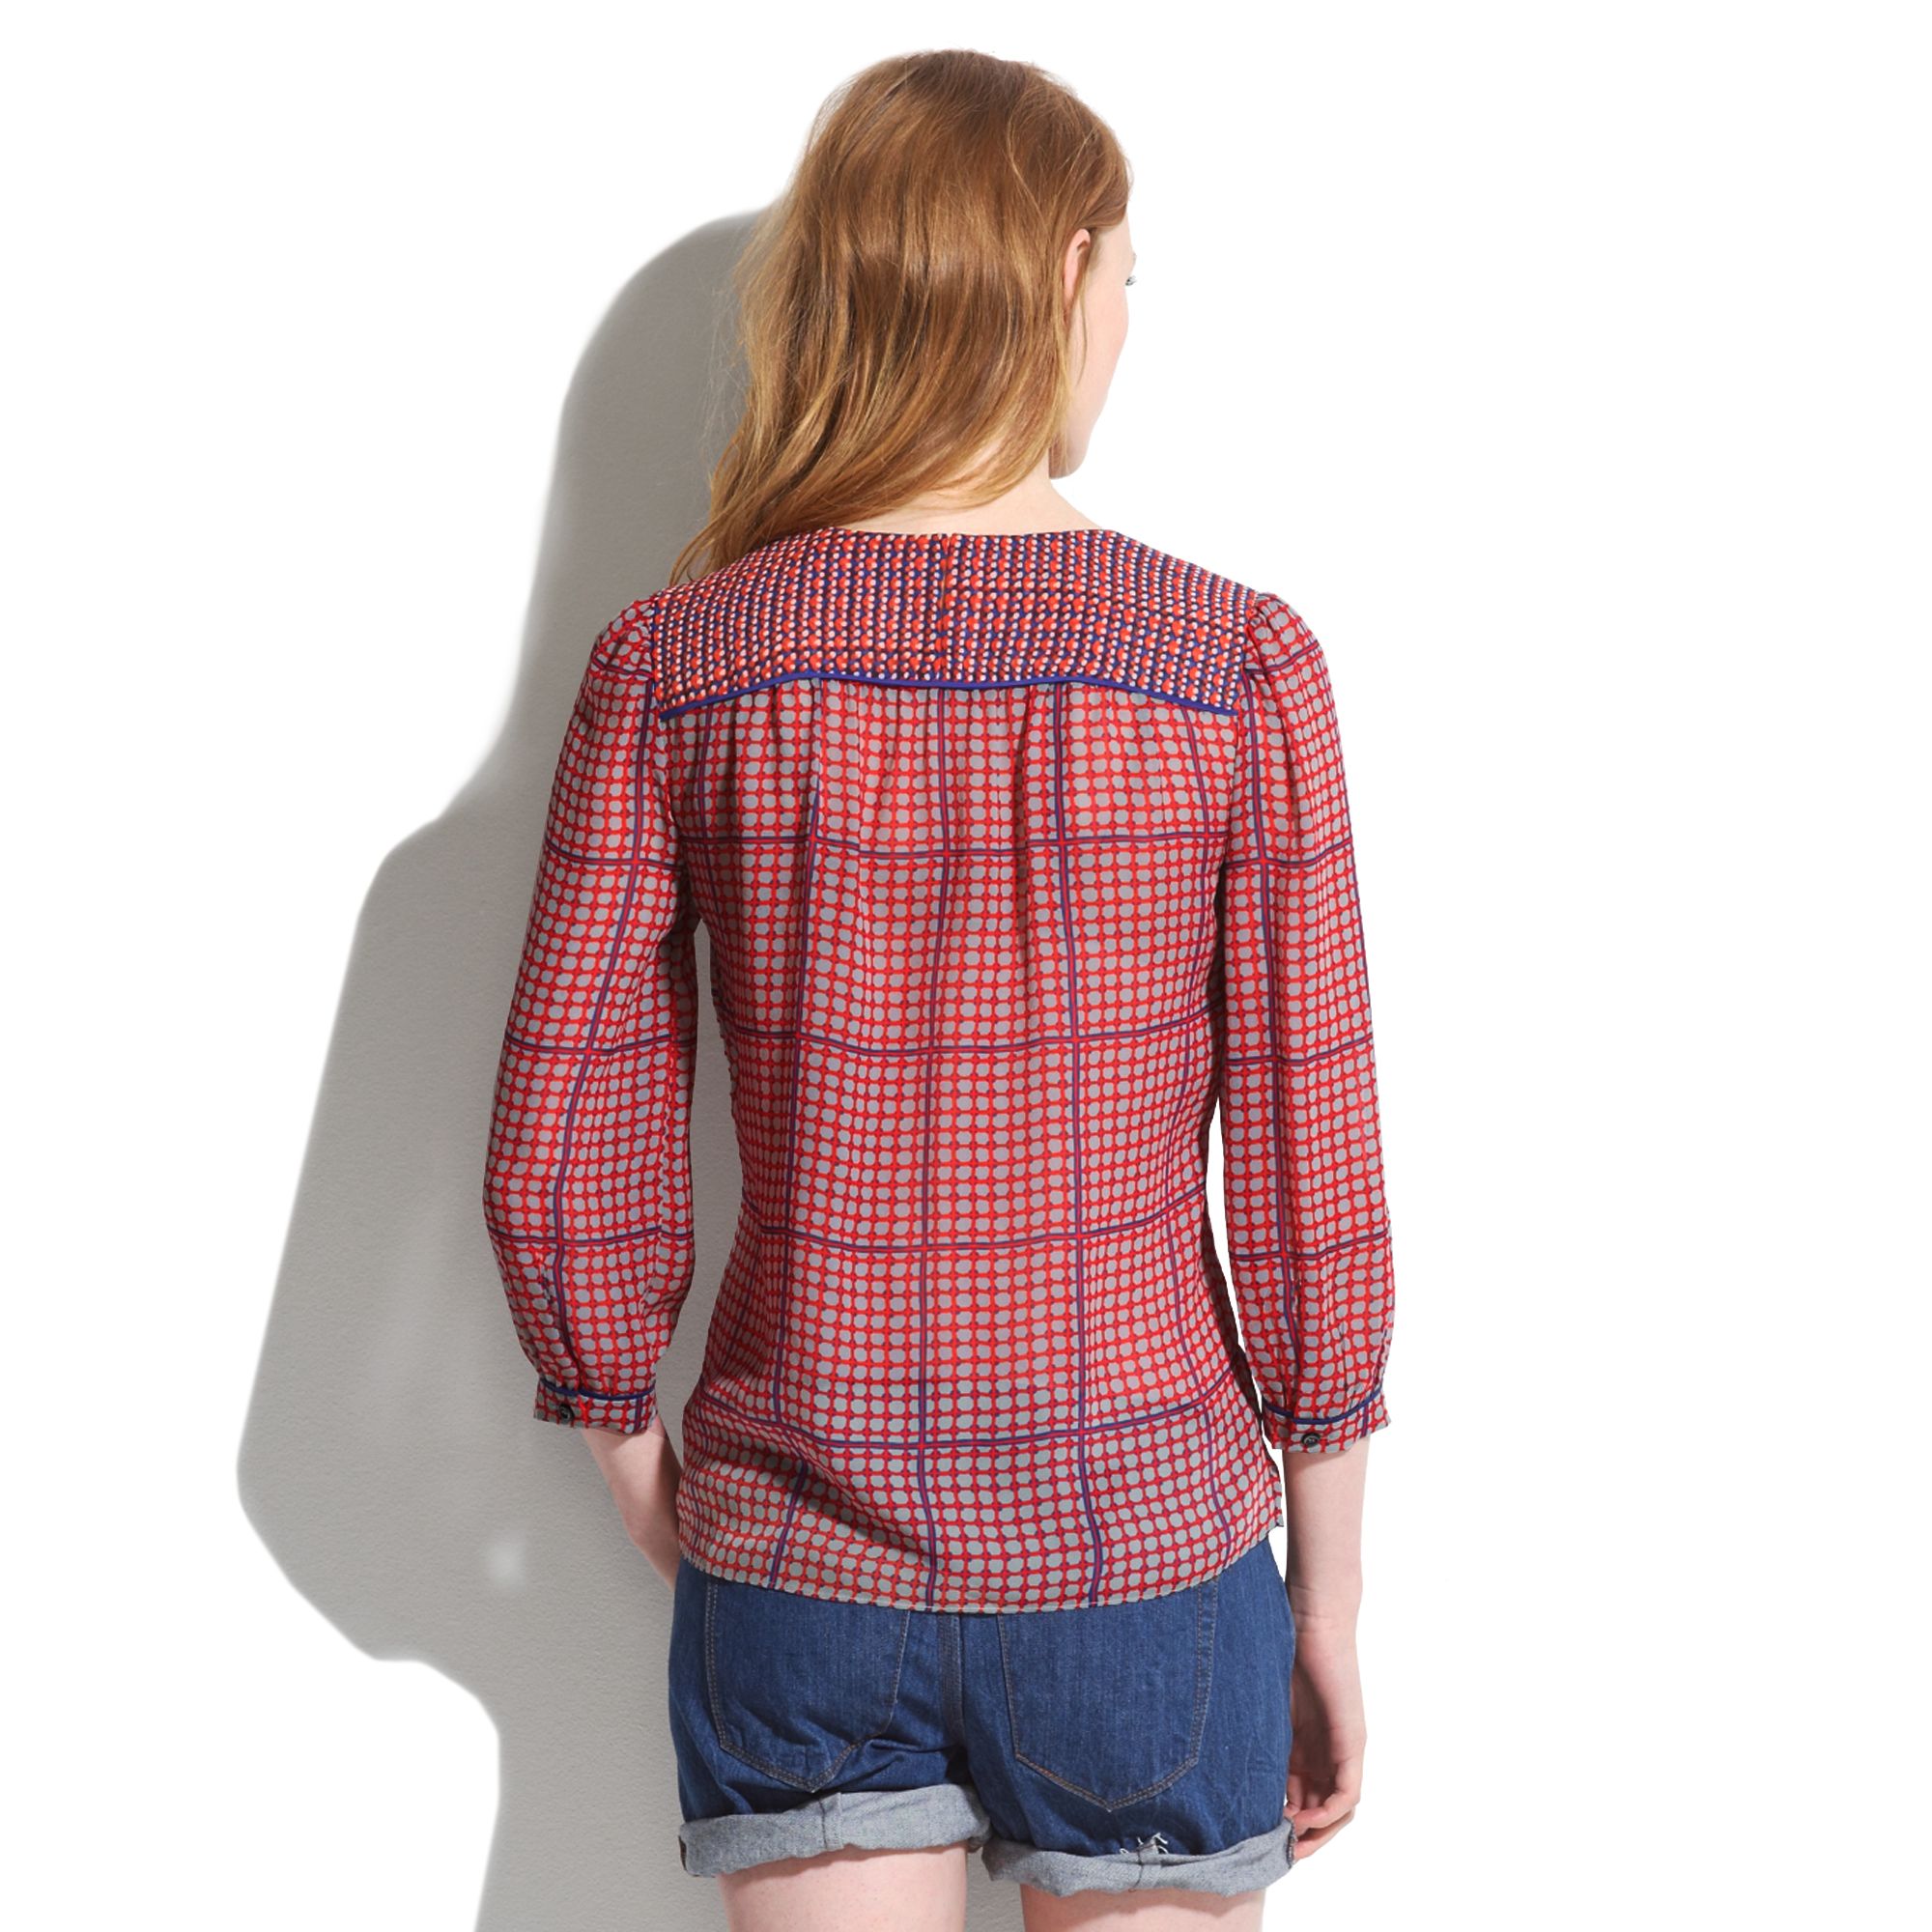 Madewell Silk Peasant Blouse in Retrogrid in Purple - Lyst